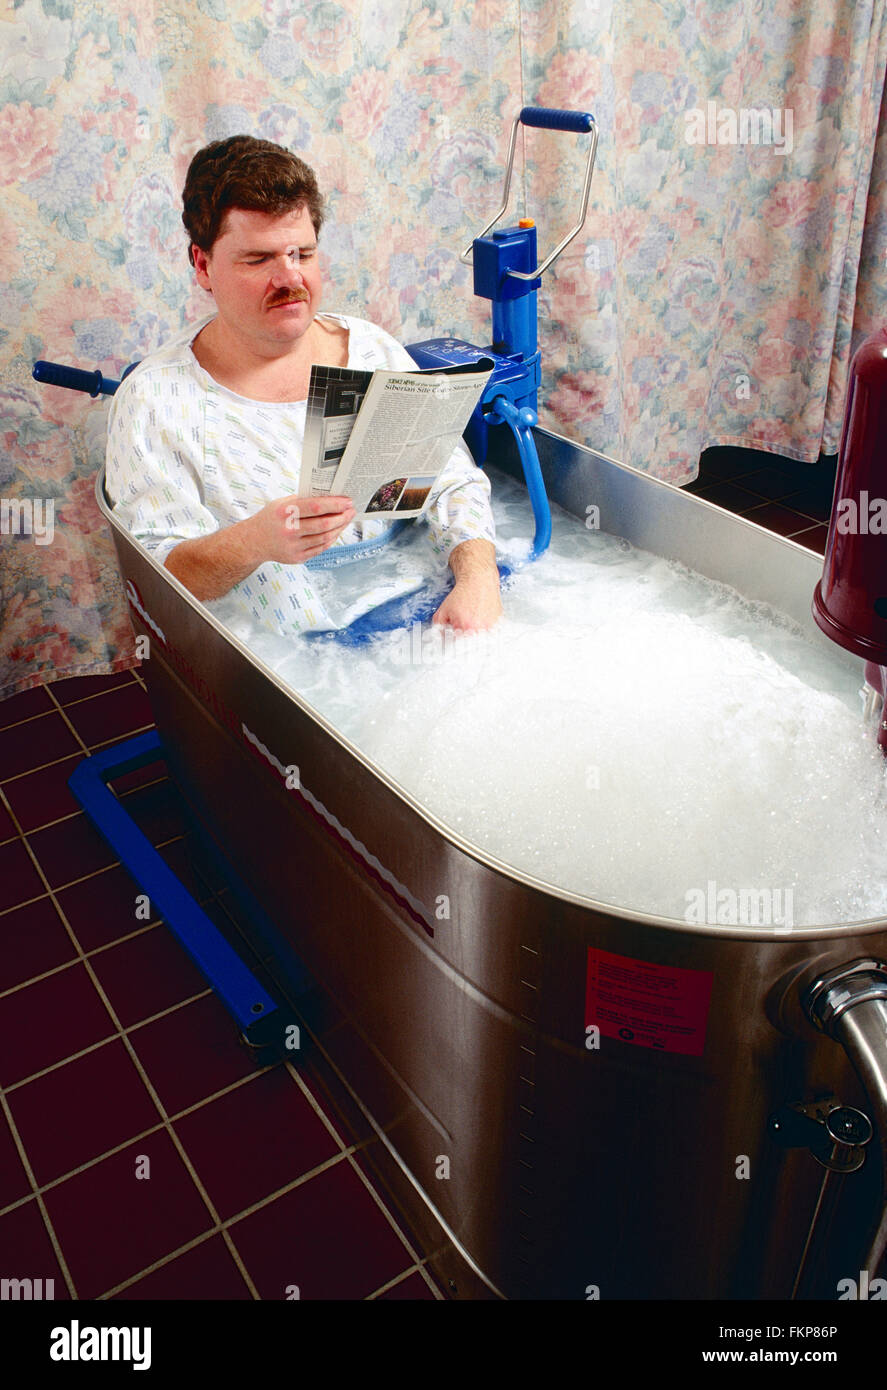 Male patient in whirlpool tub for physical therapy Stock Photo